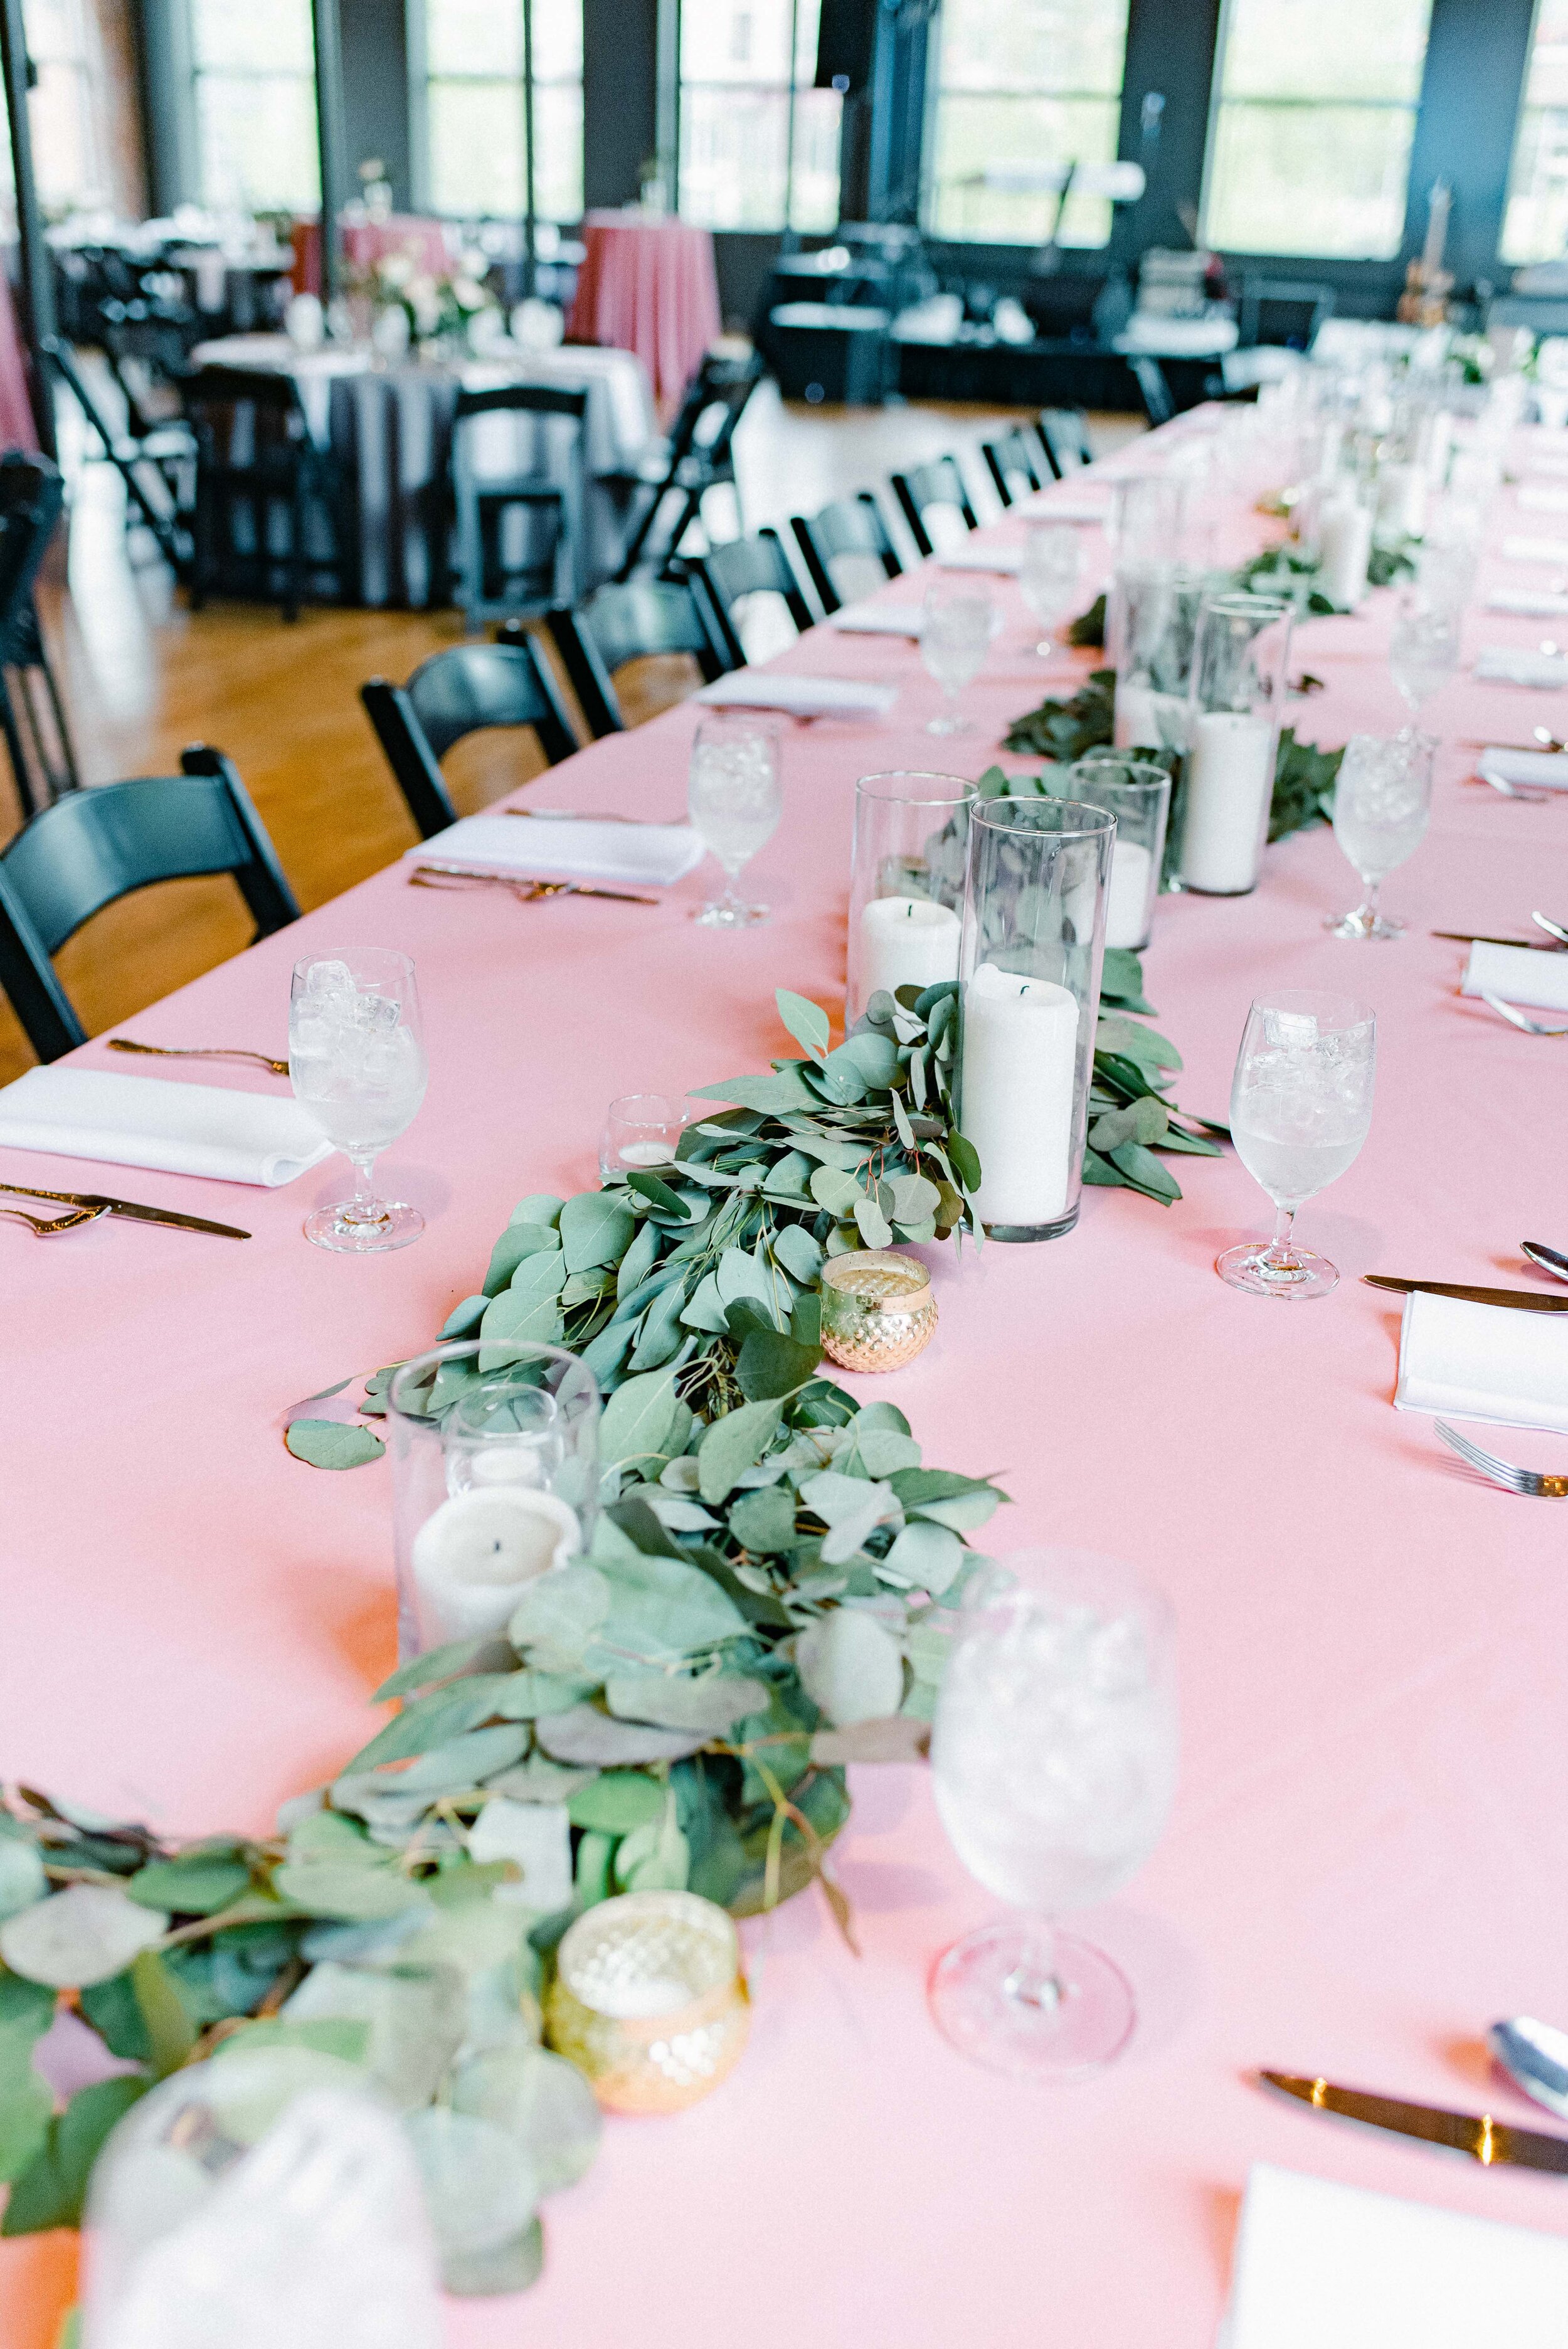 Table decor for this stunning wedding consisted of several different components. Round tables held lanterns adorned with blush and cream roses and lush greenery. Long, farm tables had garlands of eucalyptus and twinkling candles. Centerpieces filled…